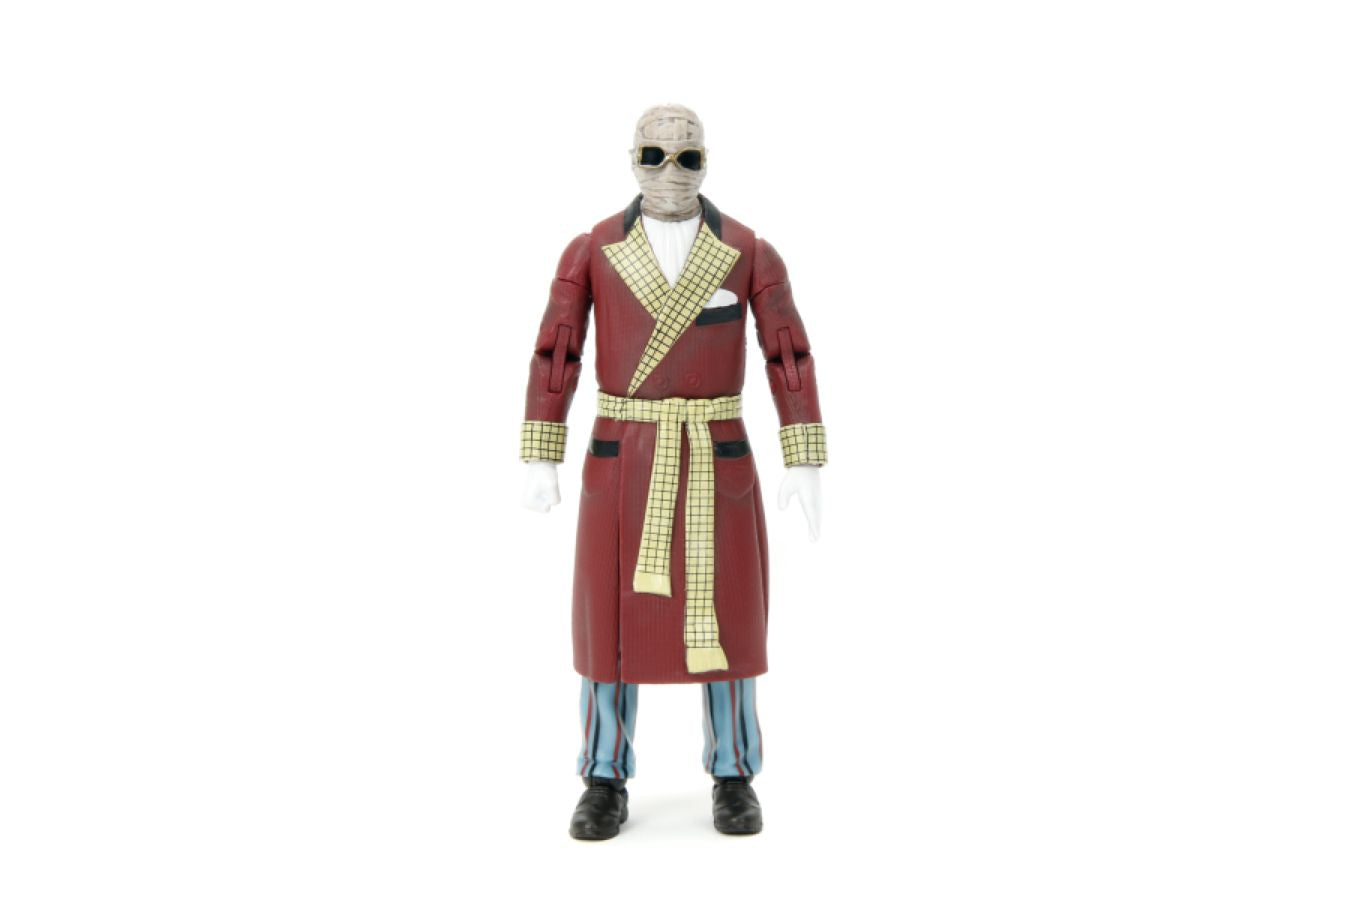 Universal Monsters - Invisible Man Deluxe 6" Action Figure